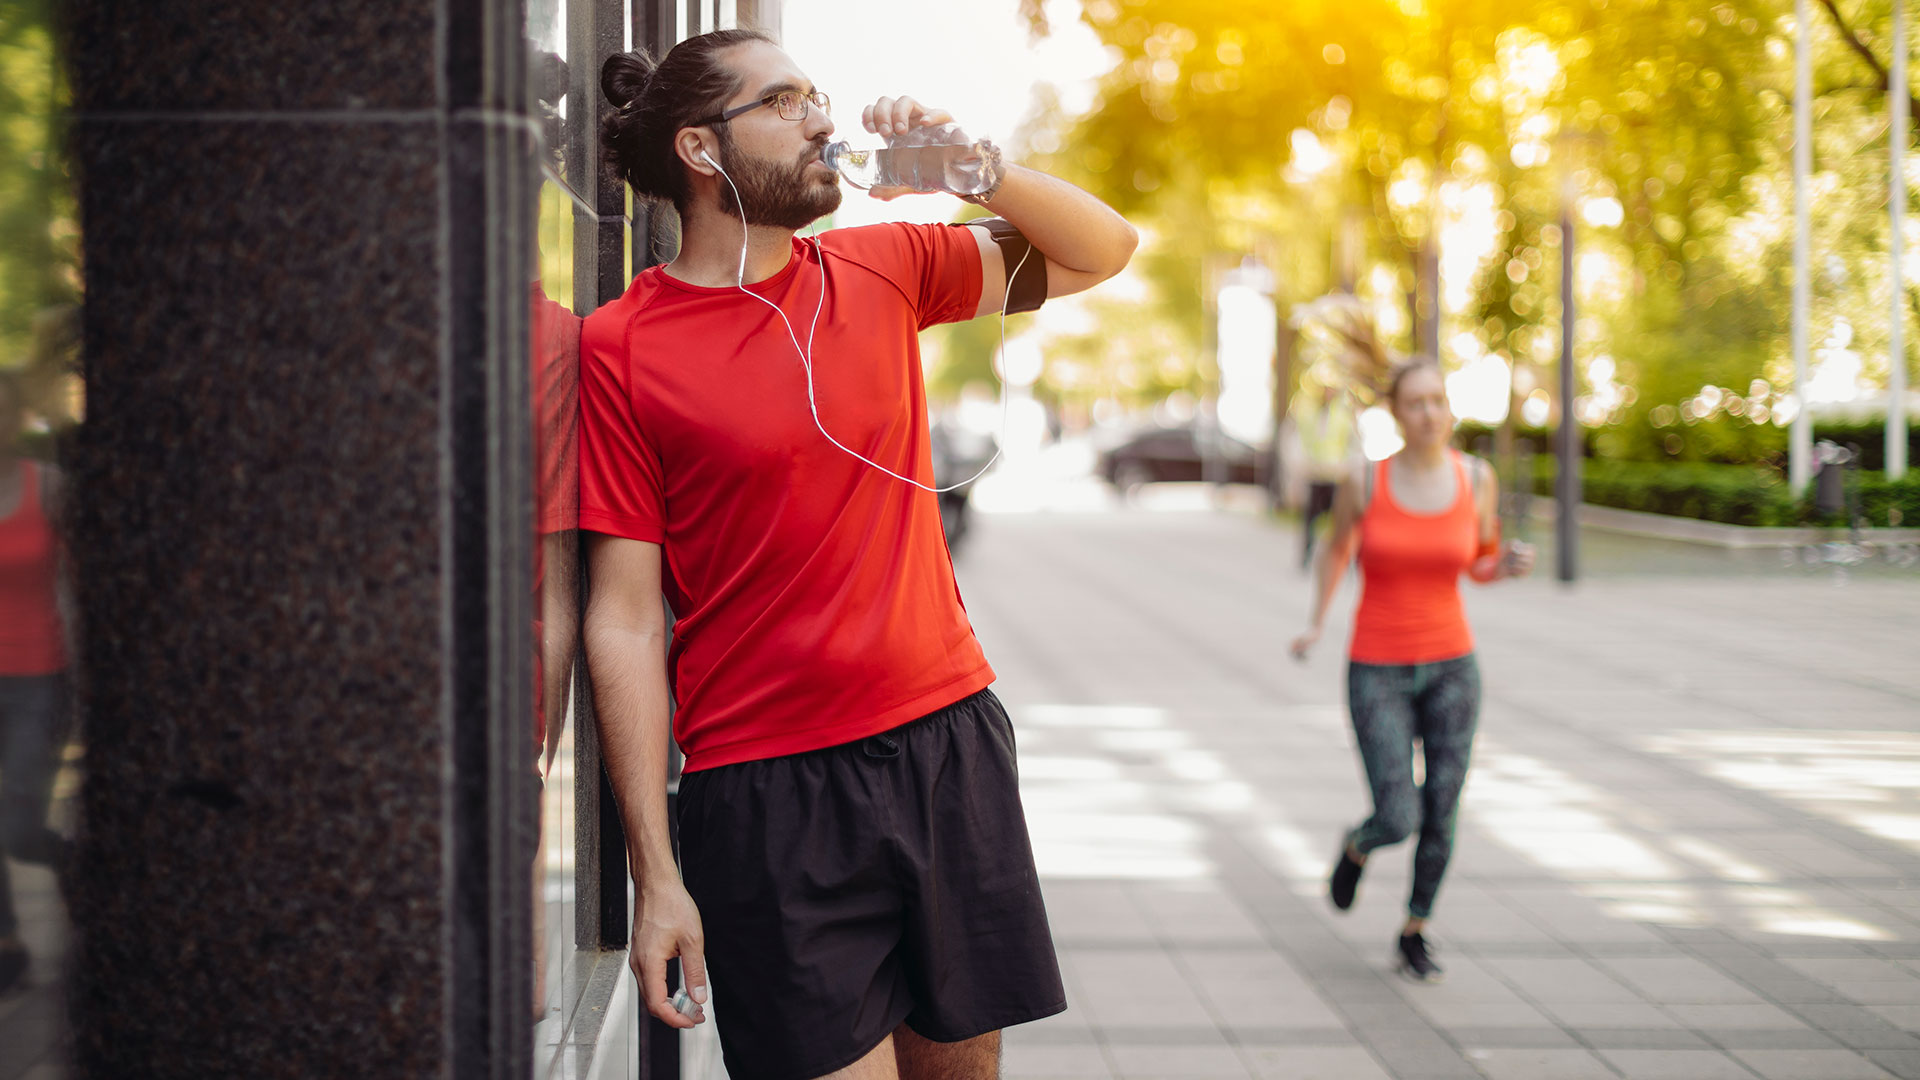 If the temperature exceeds thirty degrees, you have to drink water during training, training for an hour without drinking water can be dangerous (Getty Images) 